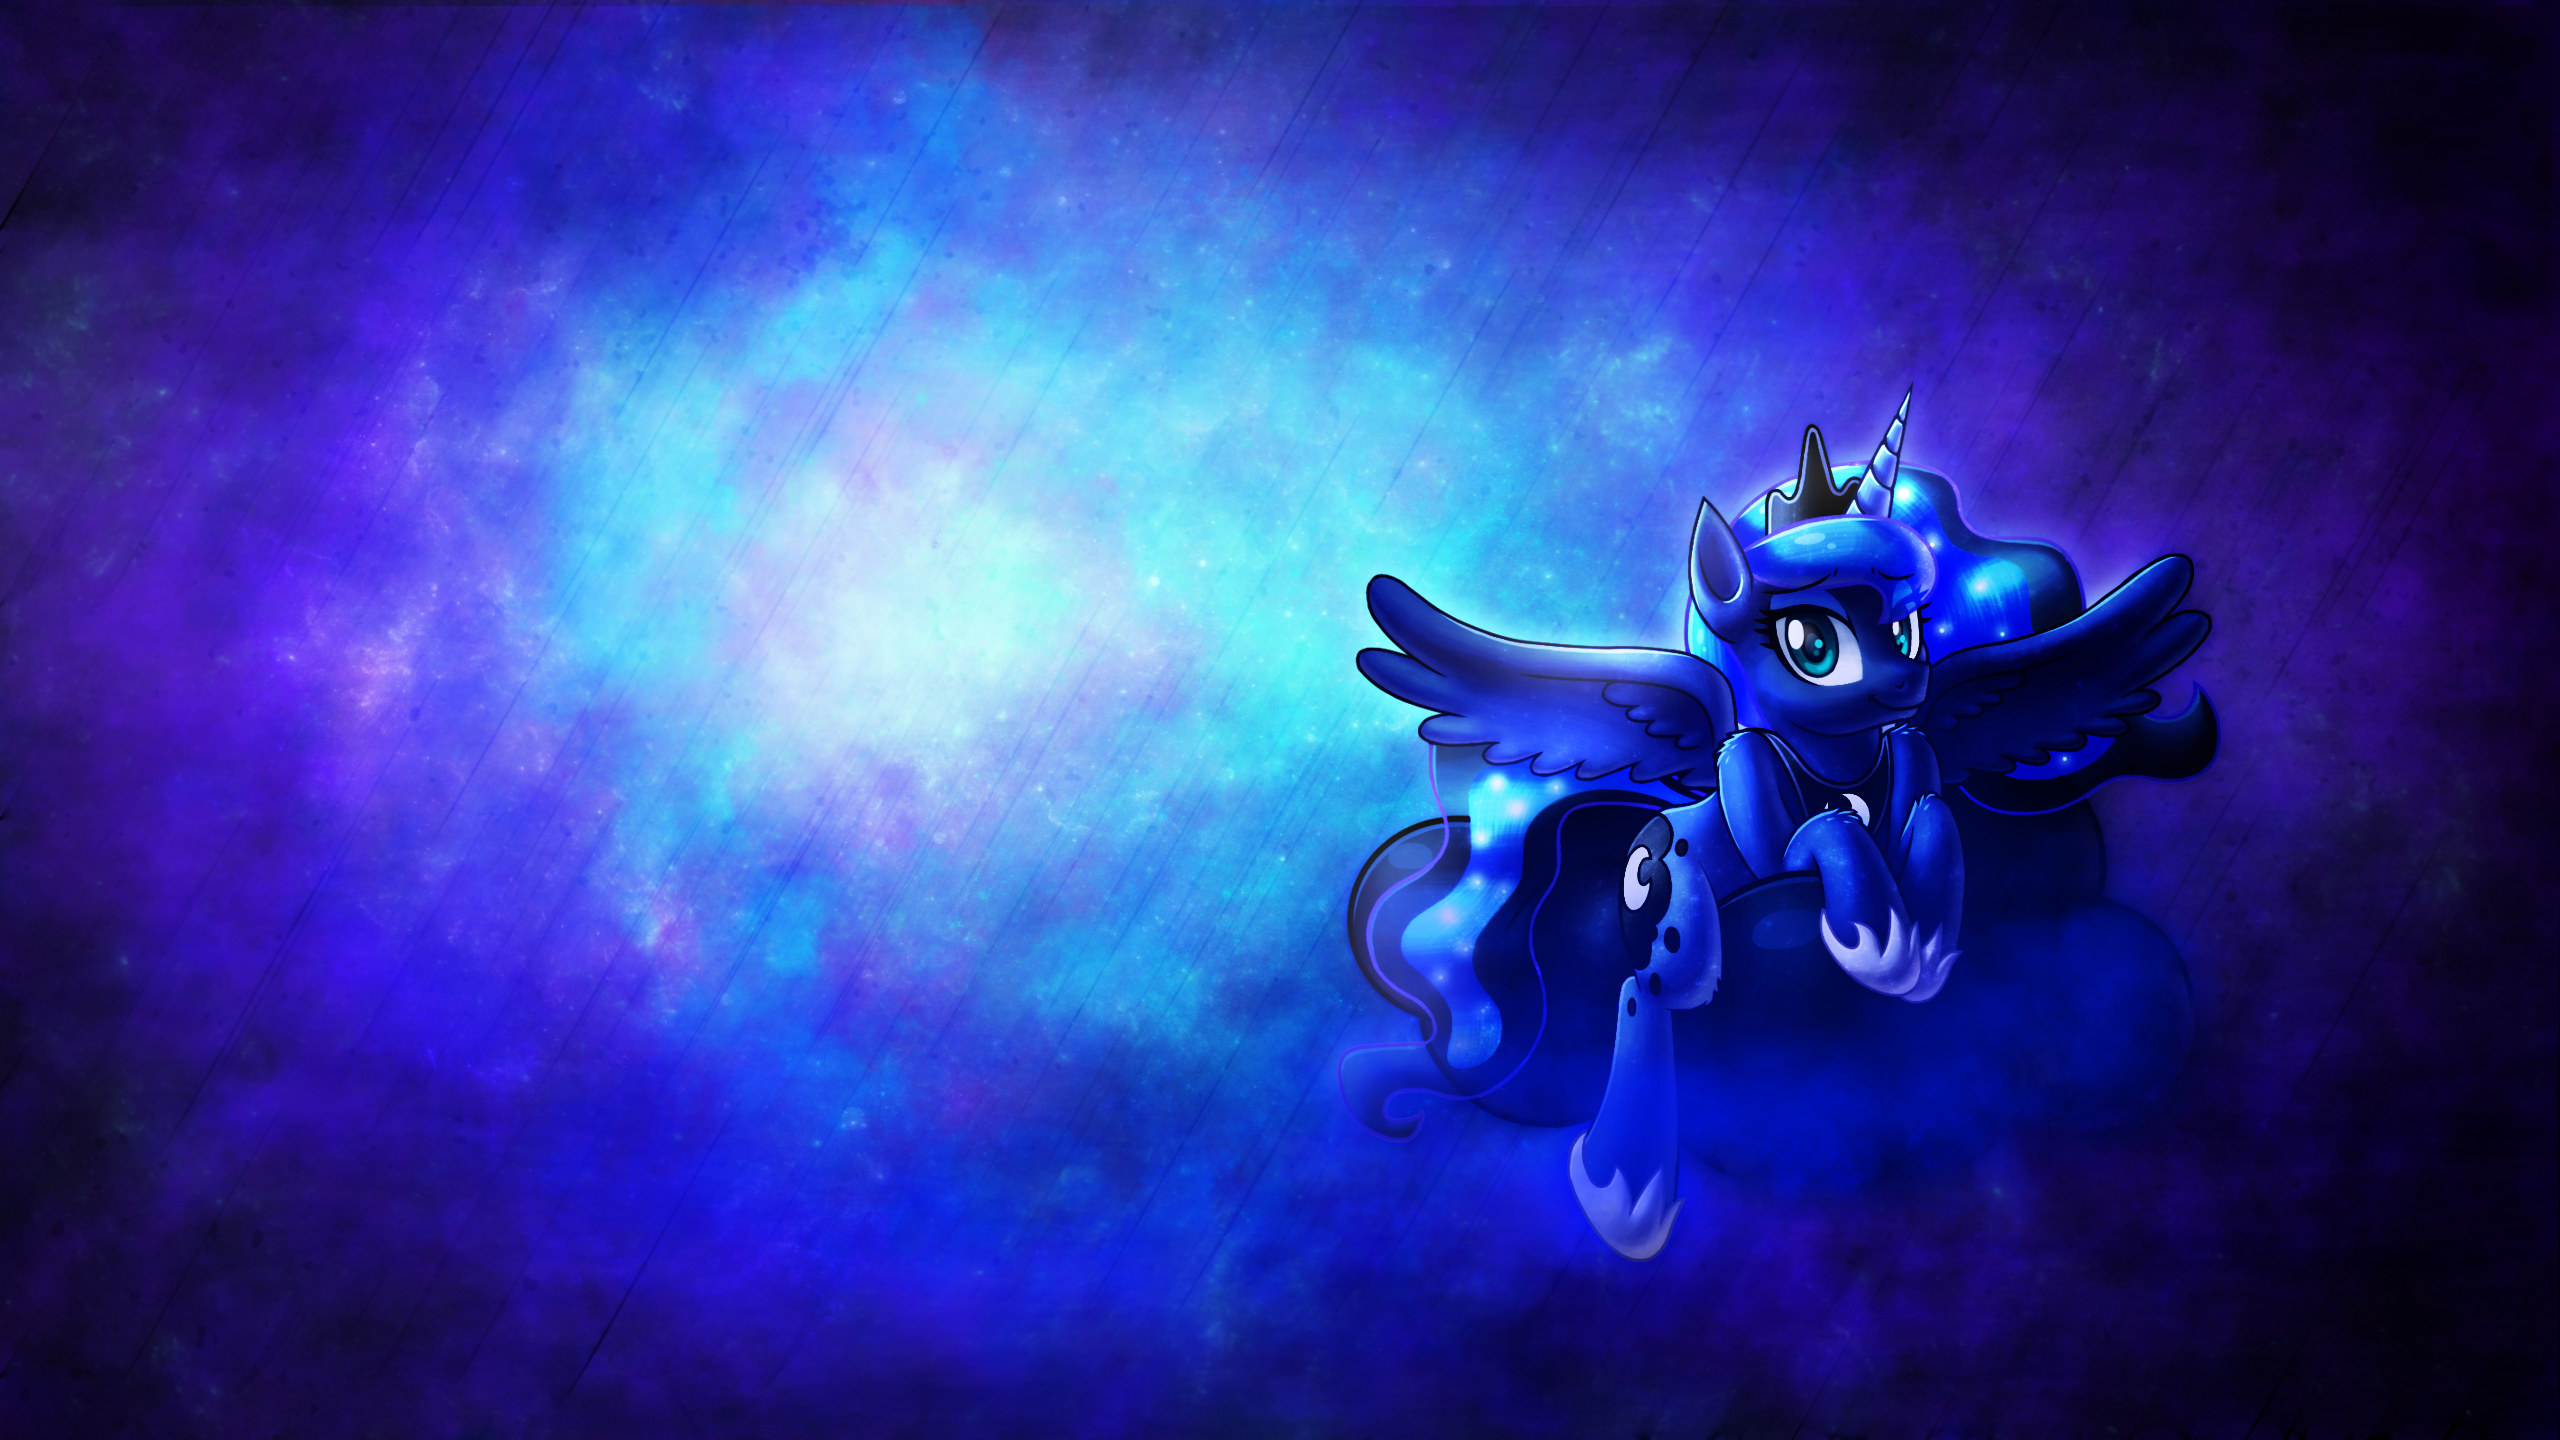 Luna wallpaper by Foop-McFawn and sgtwaflez